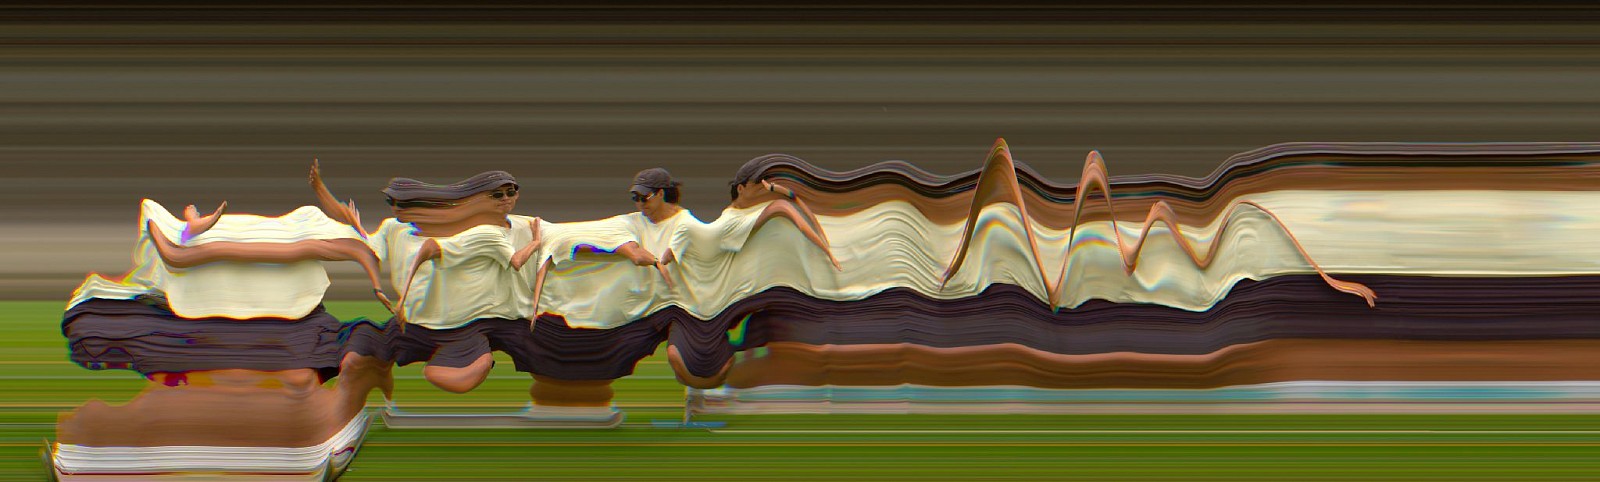 Jay Mark Johnson, TAICHI MOTION STUDY 158, 2005 Los Angeles CA
archival pigment on paper, mounted on aluminum, 40 x 132 in. (101.6 x 335.3 cm)